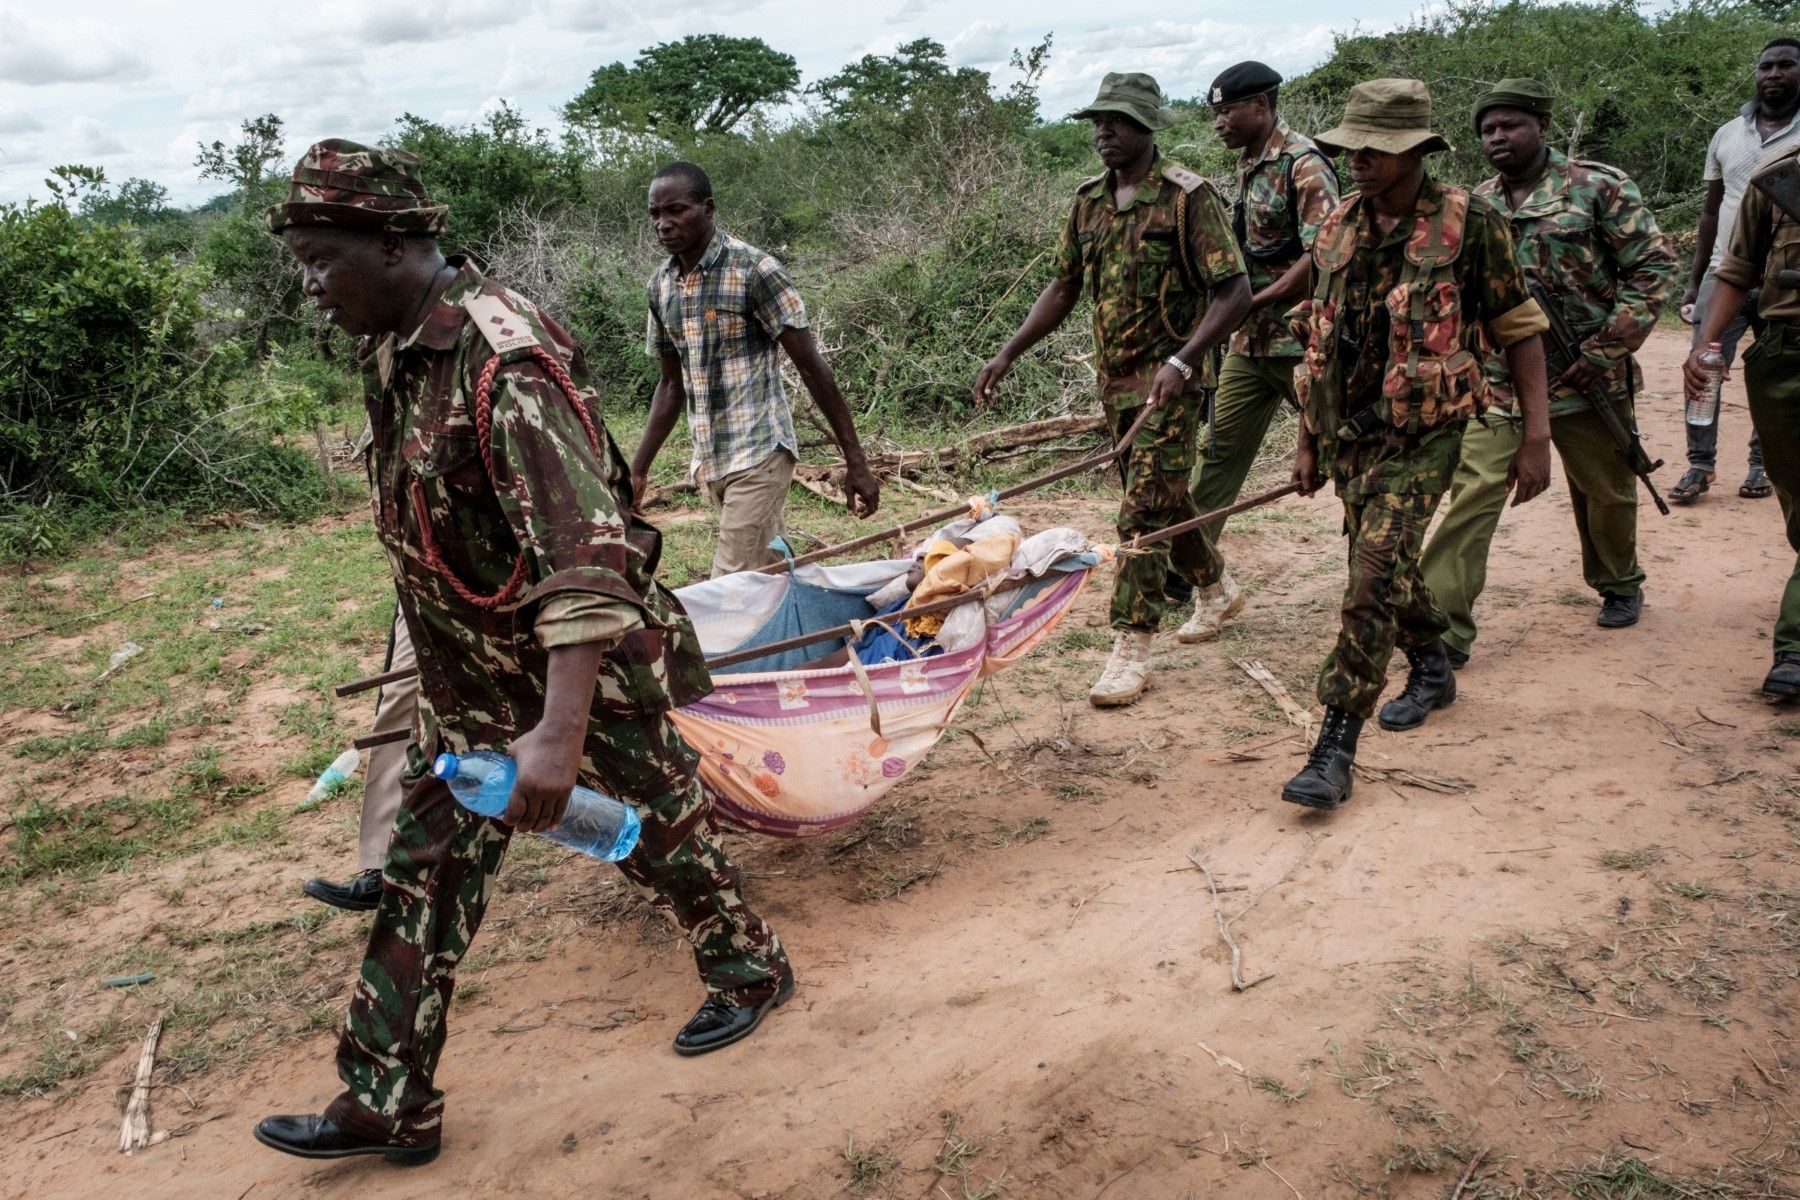 Kenya starvation cult toll climbs to 83 as more bodies found